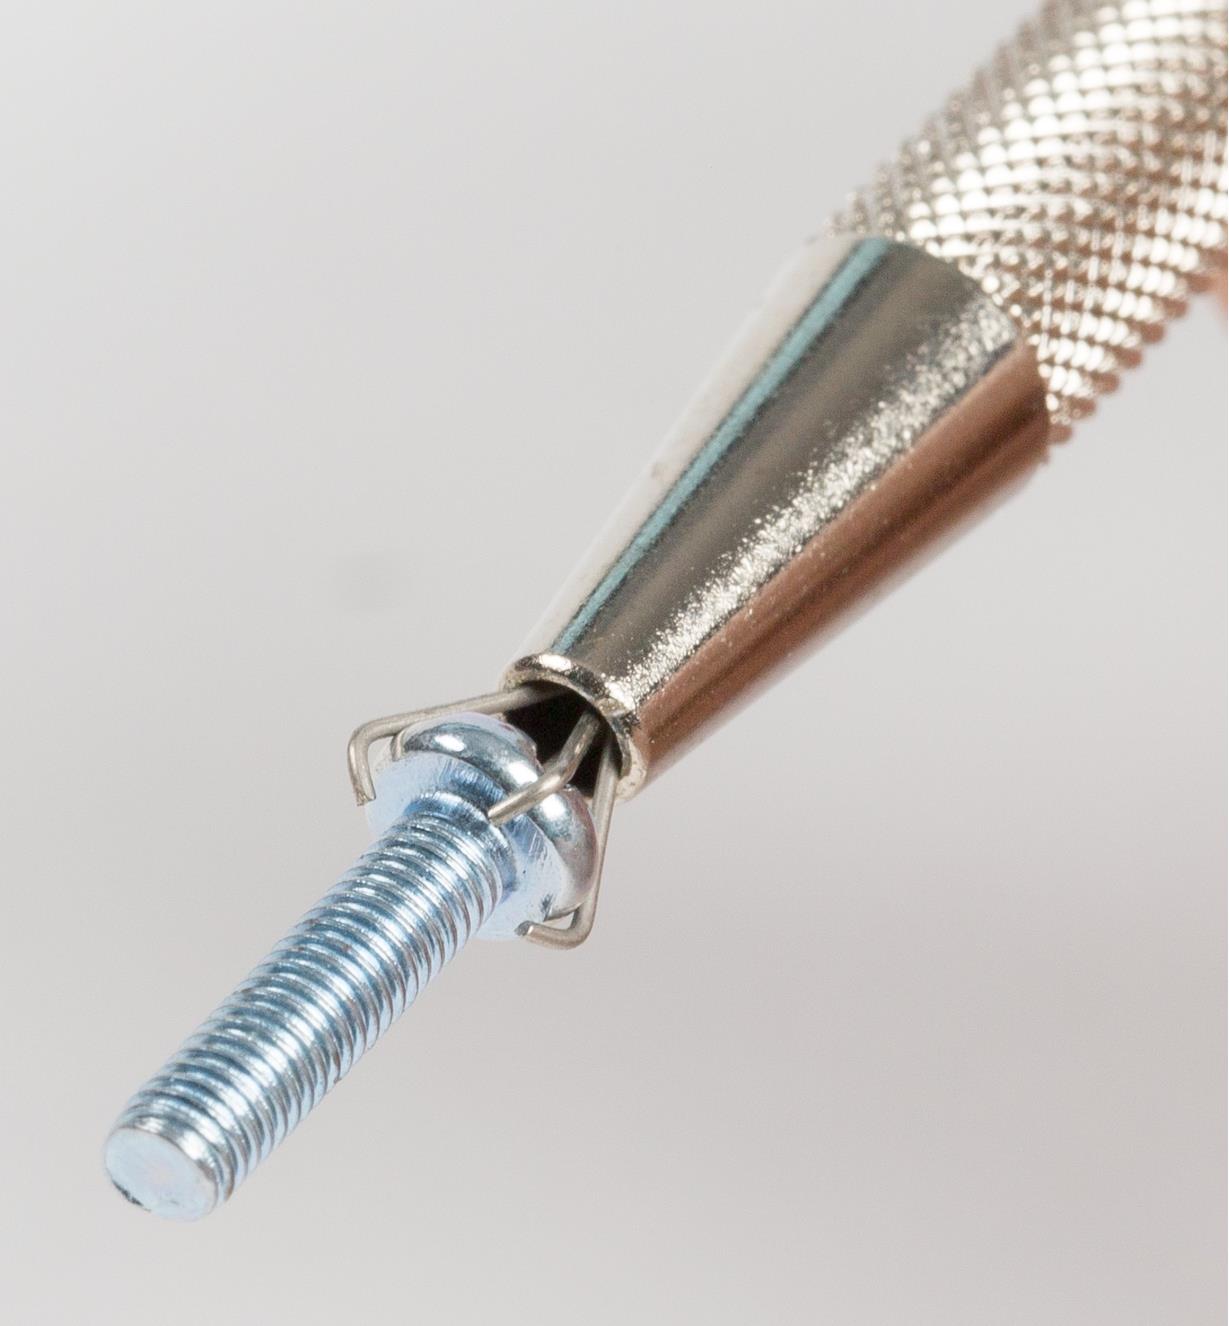 Using the Screw & Nut Grabber to hold a screw by the head